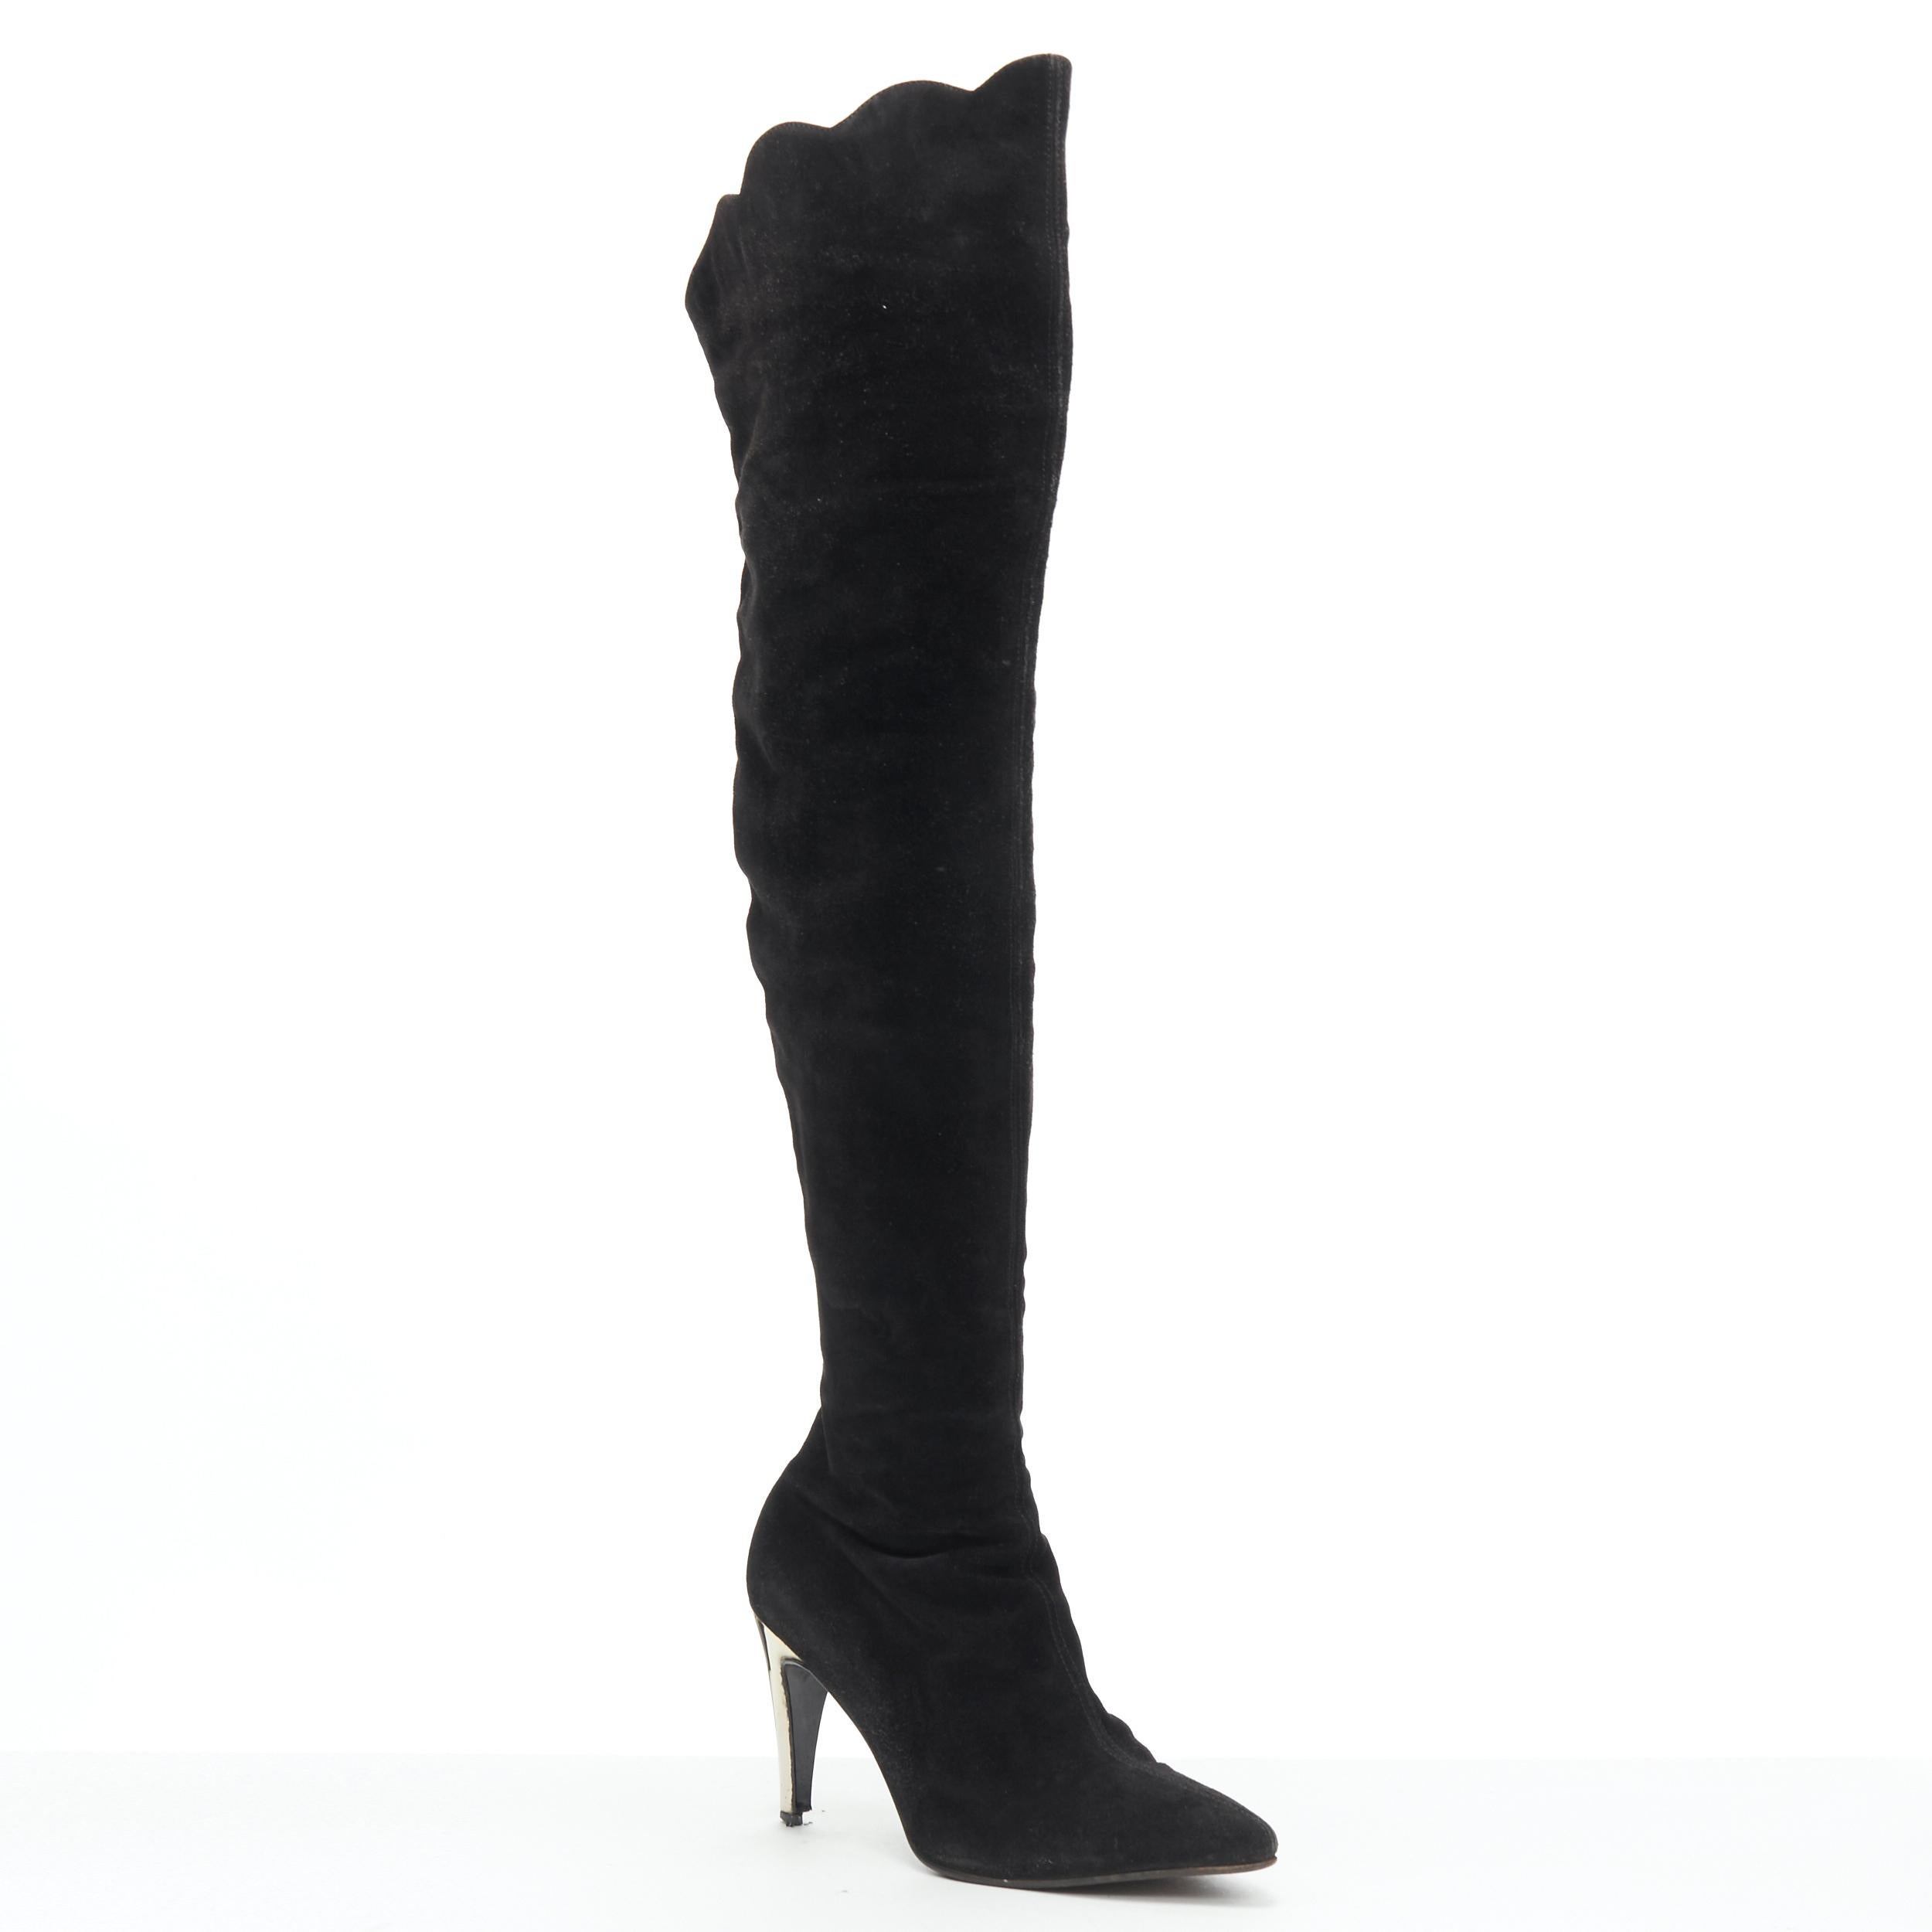 GIANNI VERSACE black suede scalloped topline gold heel pointy knee boot EU37 
Reference: GIYG/A00117 
Brand: Gianni Versace 
Designer: Gianni Versace 
Material: Suede 
Color: Black 
Pattern: Solid 
Closure: Zip 
Extra Detail: Scalloped top line.